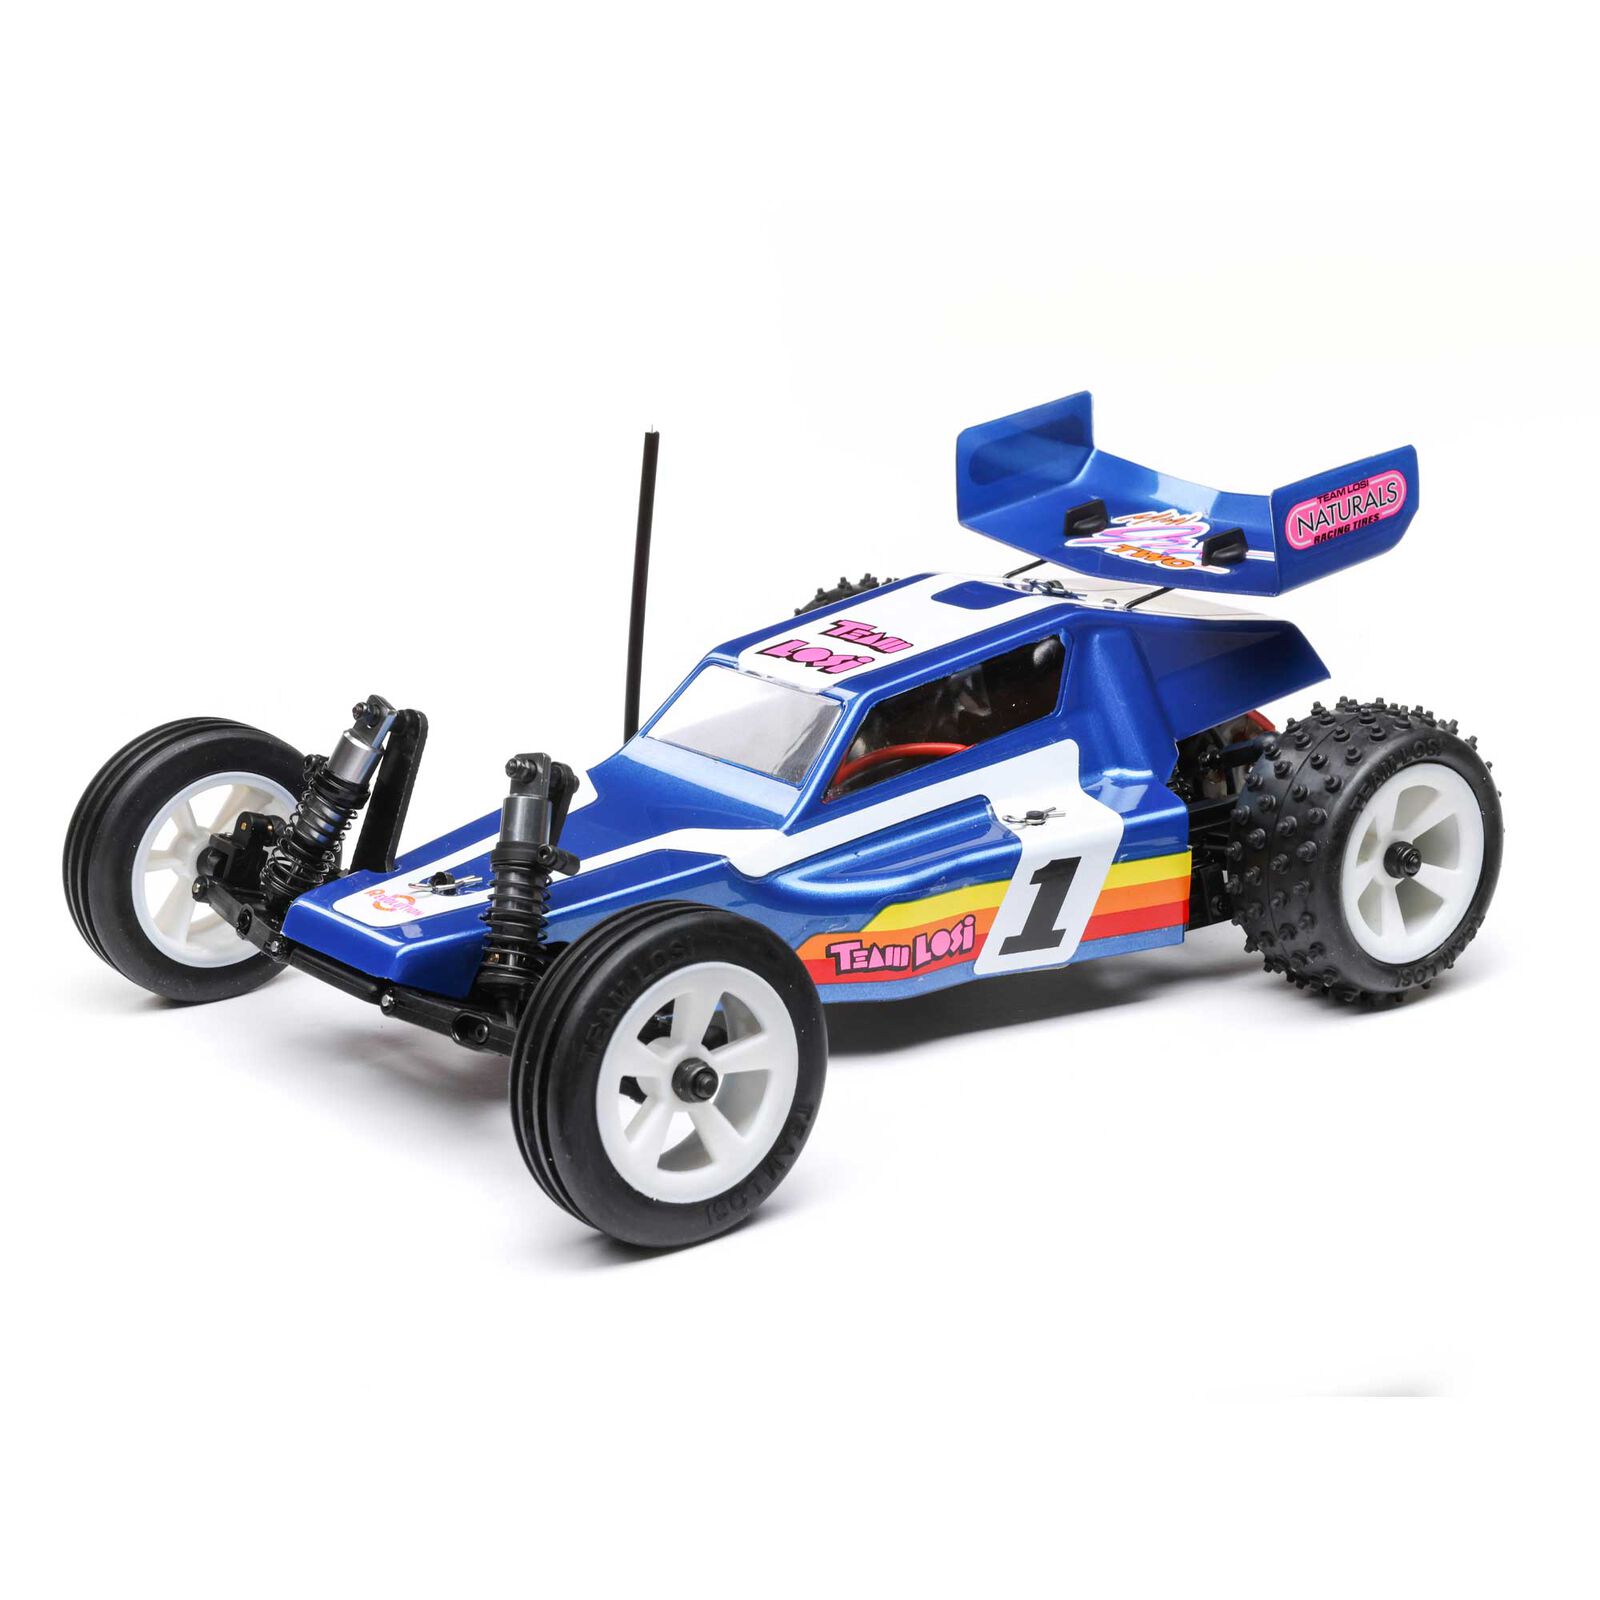 Losi LOS01020T2 - 1/16 Mini JRX2 Brushed 2WD Buggy RTR, Blue